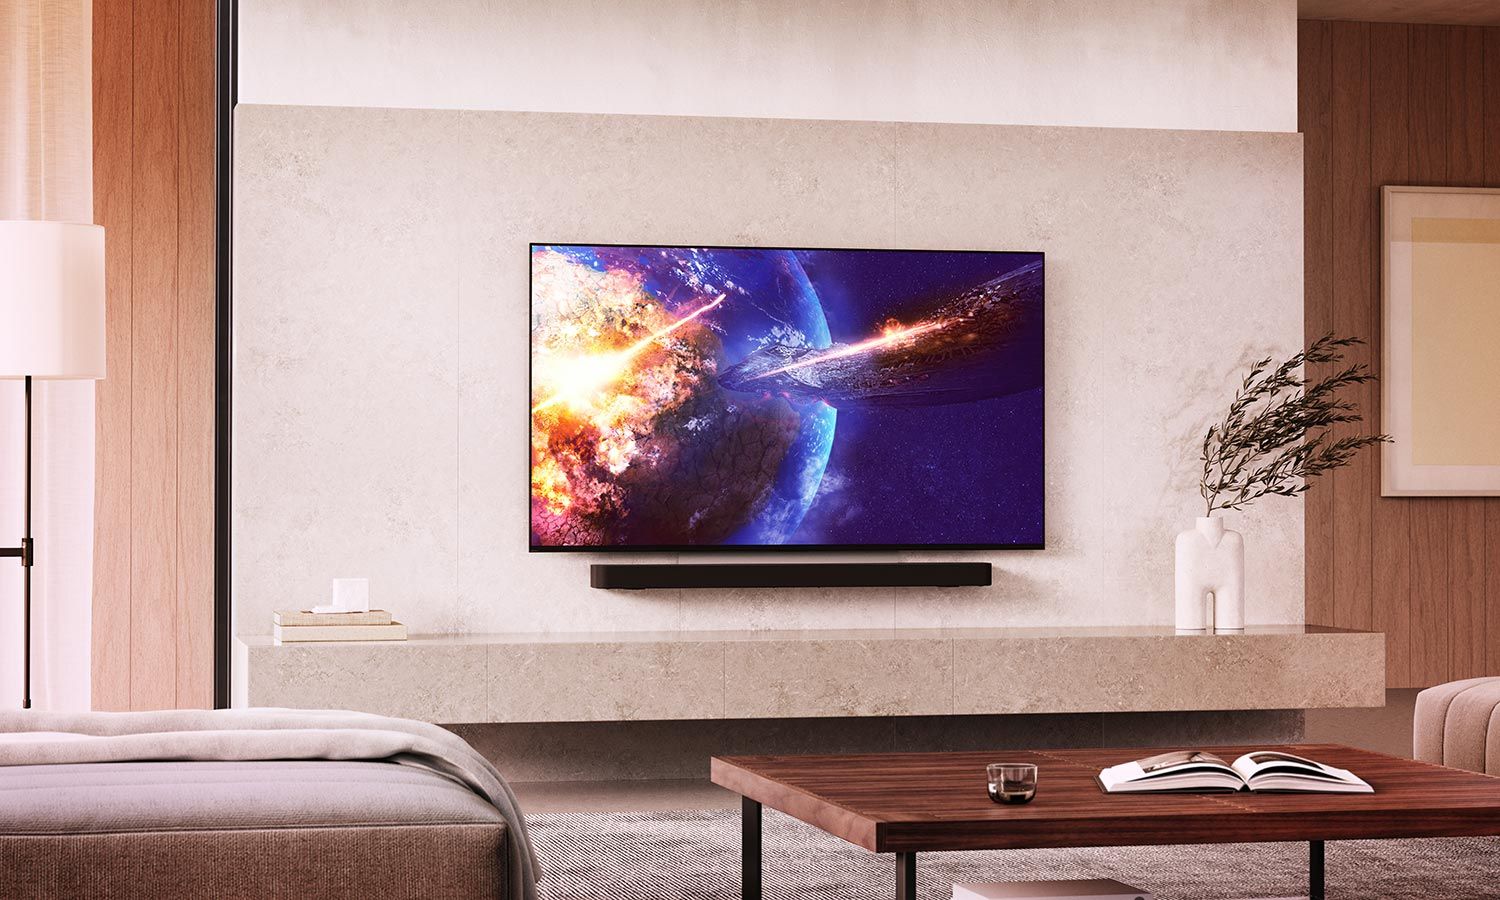 Sony flat-screen TV mounted on a living room wall, displaying vibrant and immersive visuals.